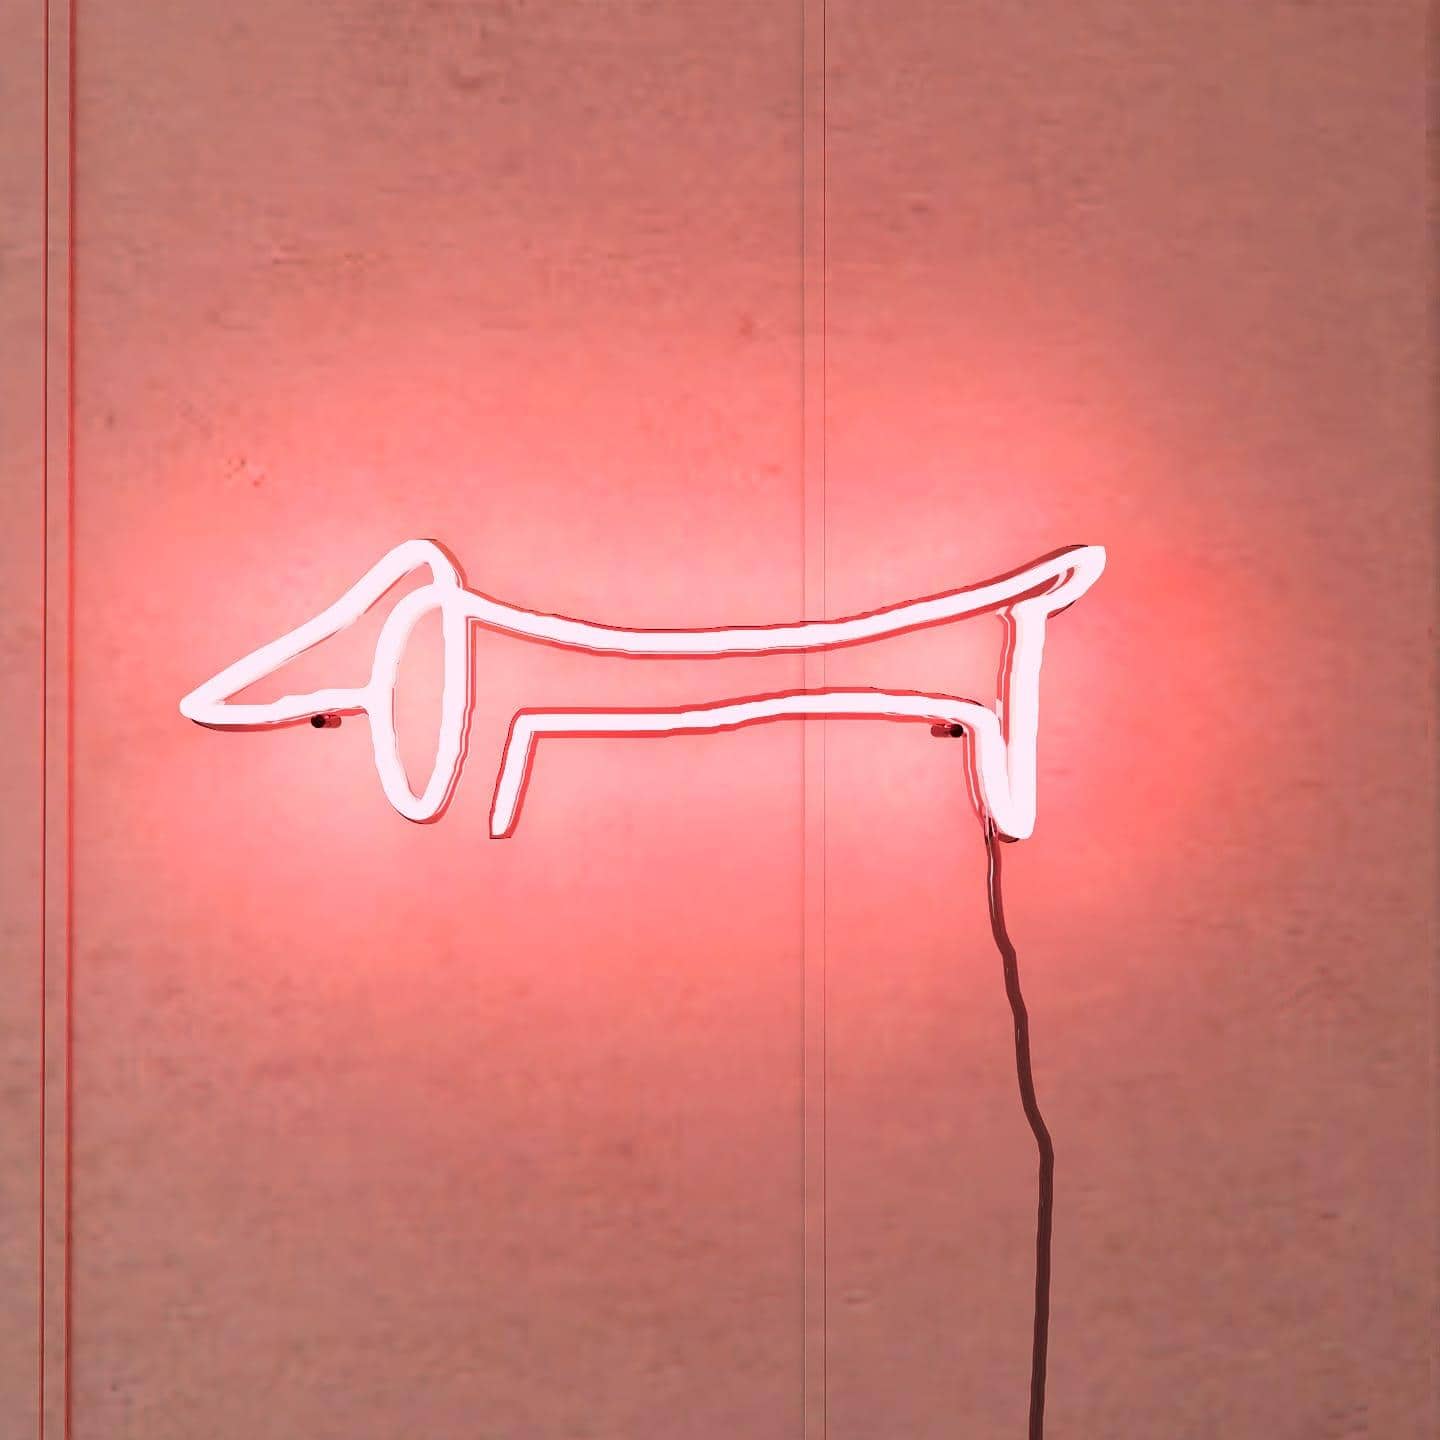 picasso-sketch-of-dachshund-hanging-on-wall-display-illuminated-at-night-red